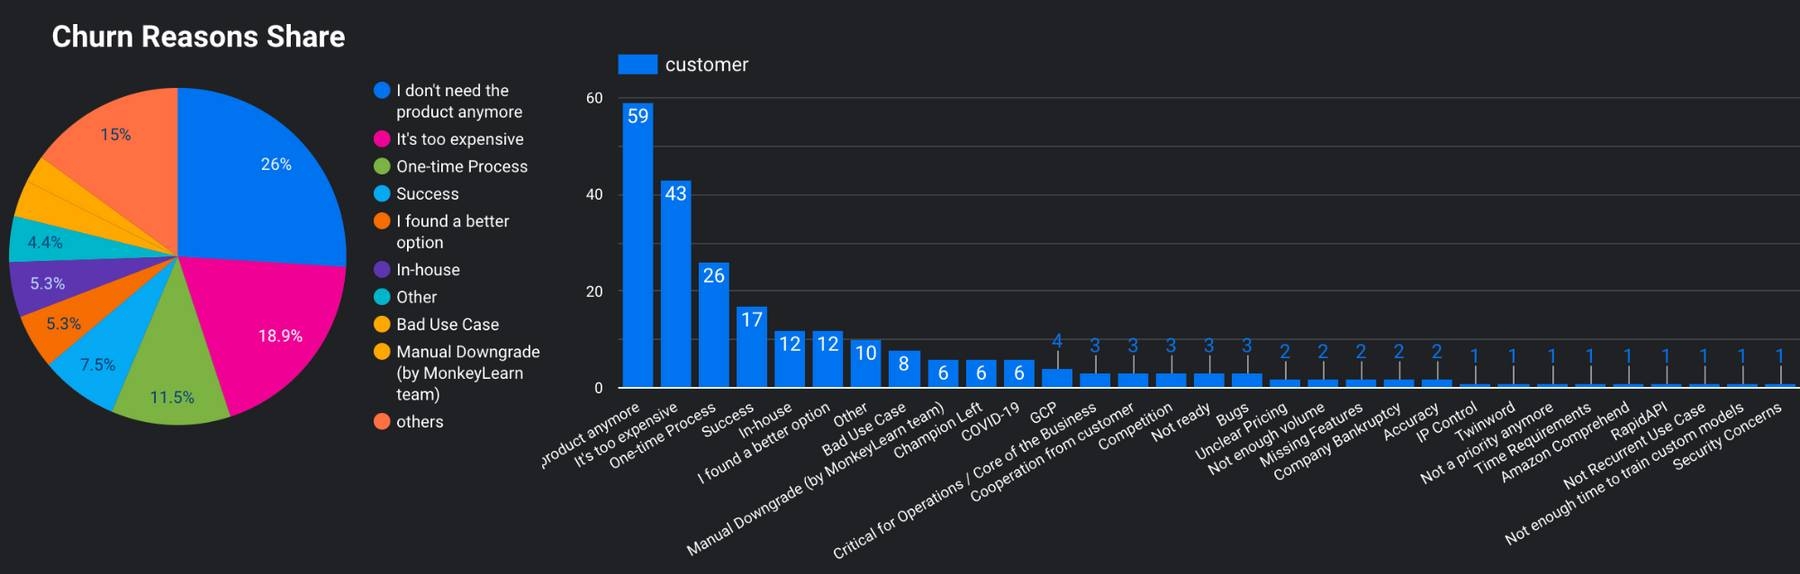 Customer churn analysis visualization showing 'churn reasons share' and number of customers that answered for each.